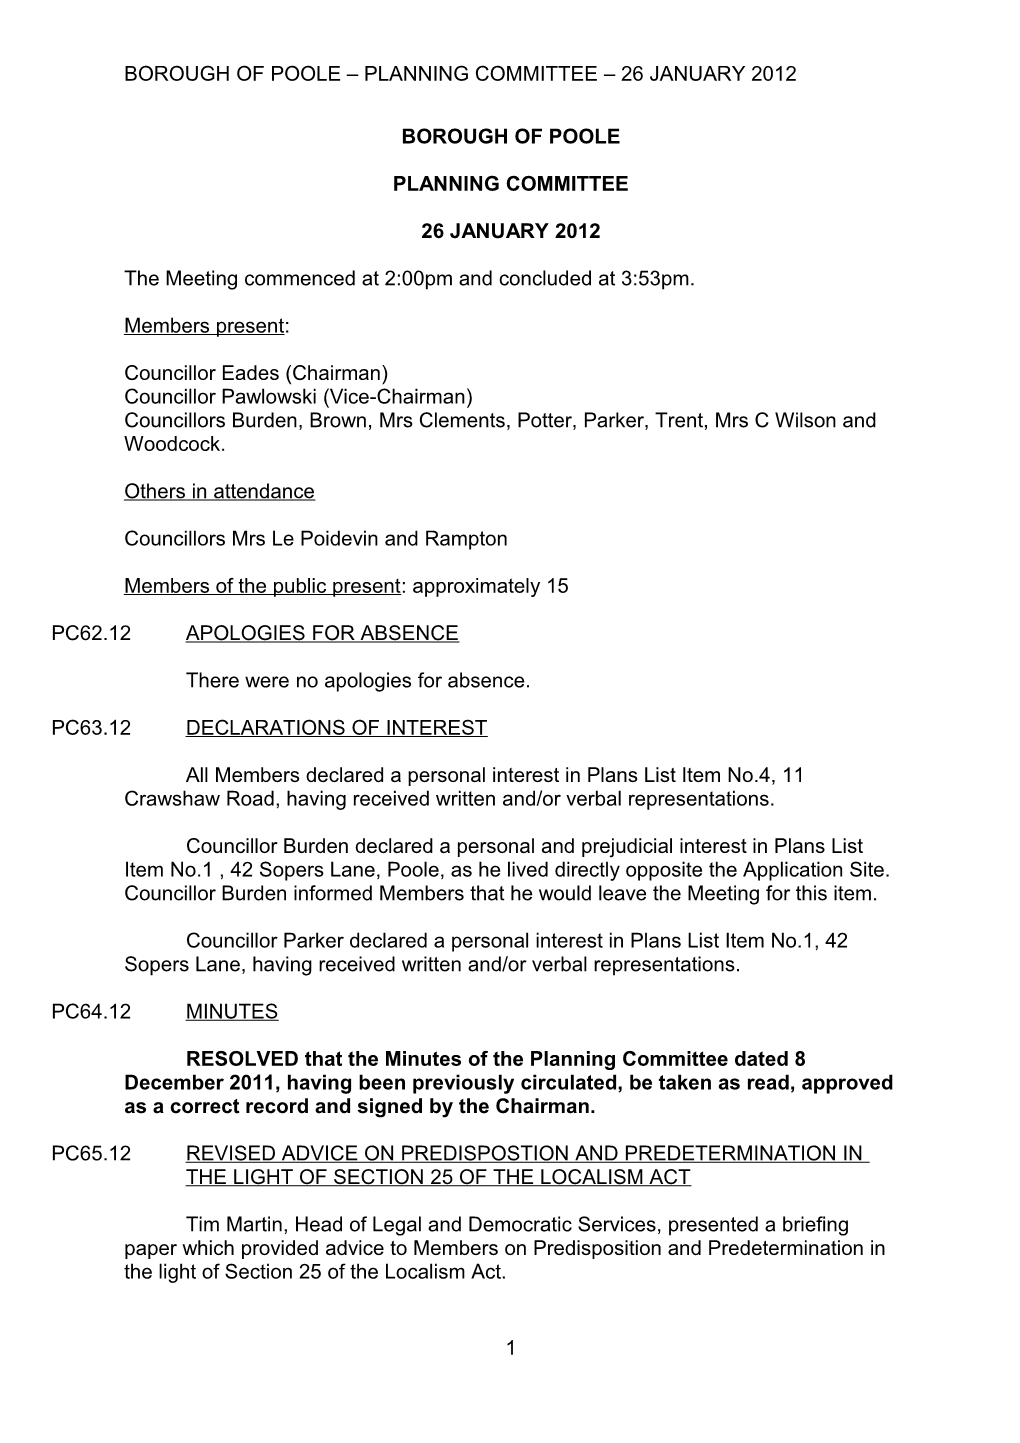 Borough of Poole Planning Committee 26 January 2012